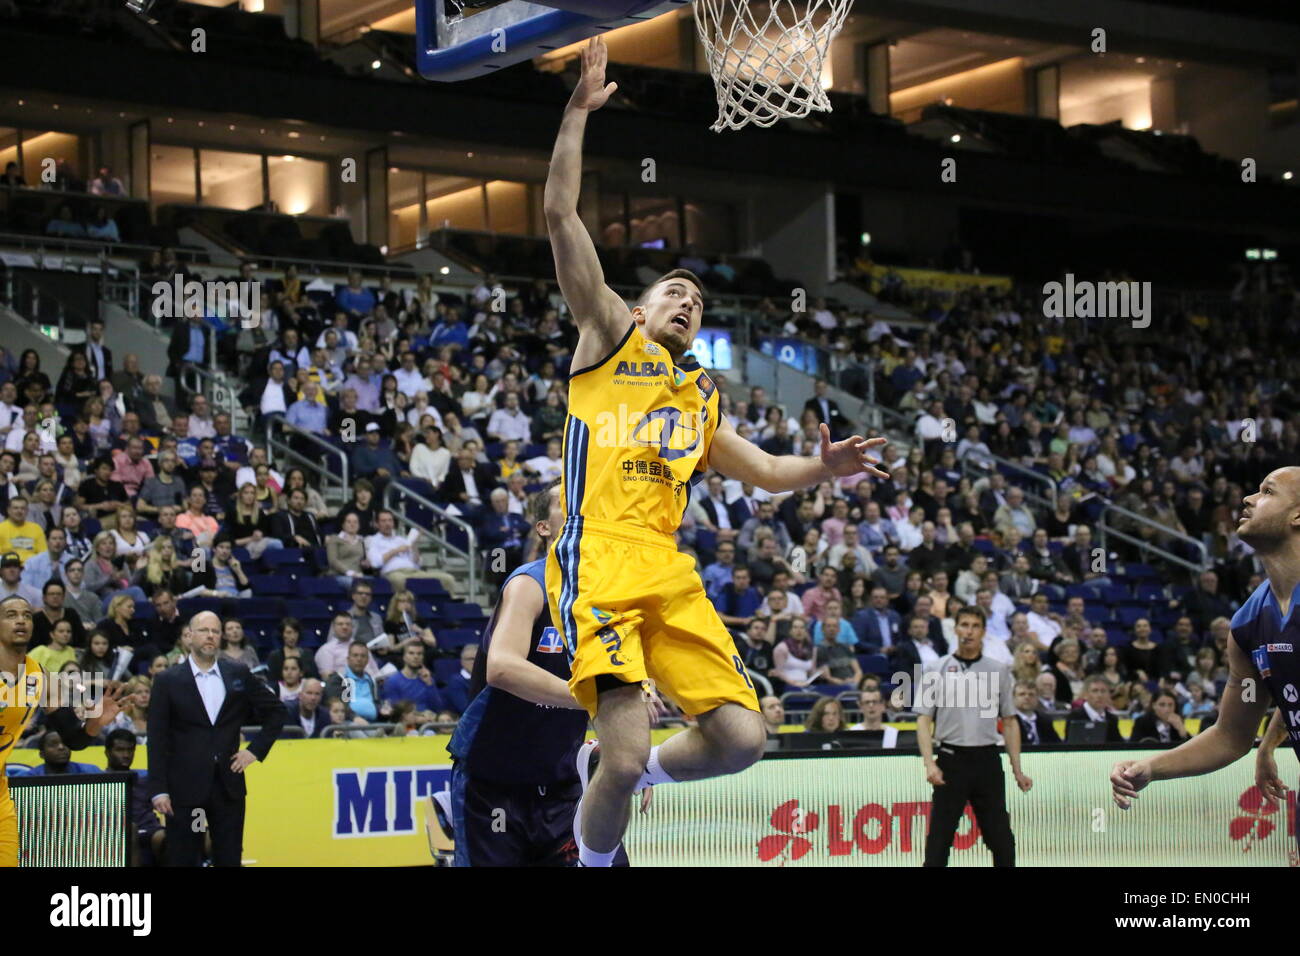 Berlin, Germany. 24th Apr, 2015. Ismet Akpinar (8) sets 2 points for Alba during BBL game Alba Berlin versus Crailsheim Merlins at O2 World. Credit:  Madeleine Lenz/Pacific Press/Alamy Live News Stock Photo